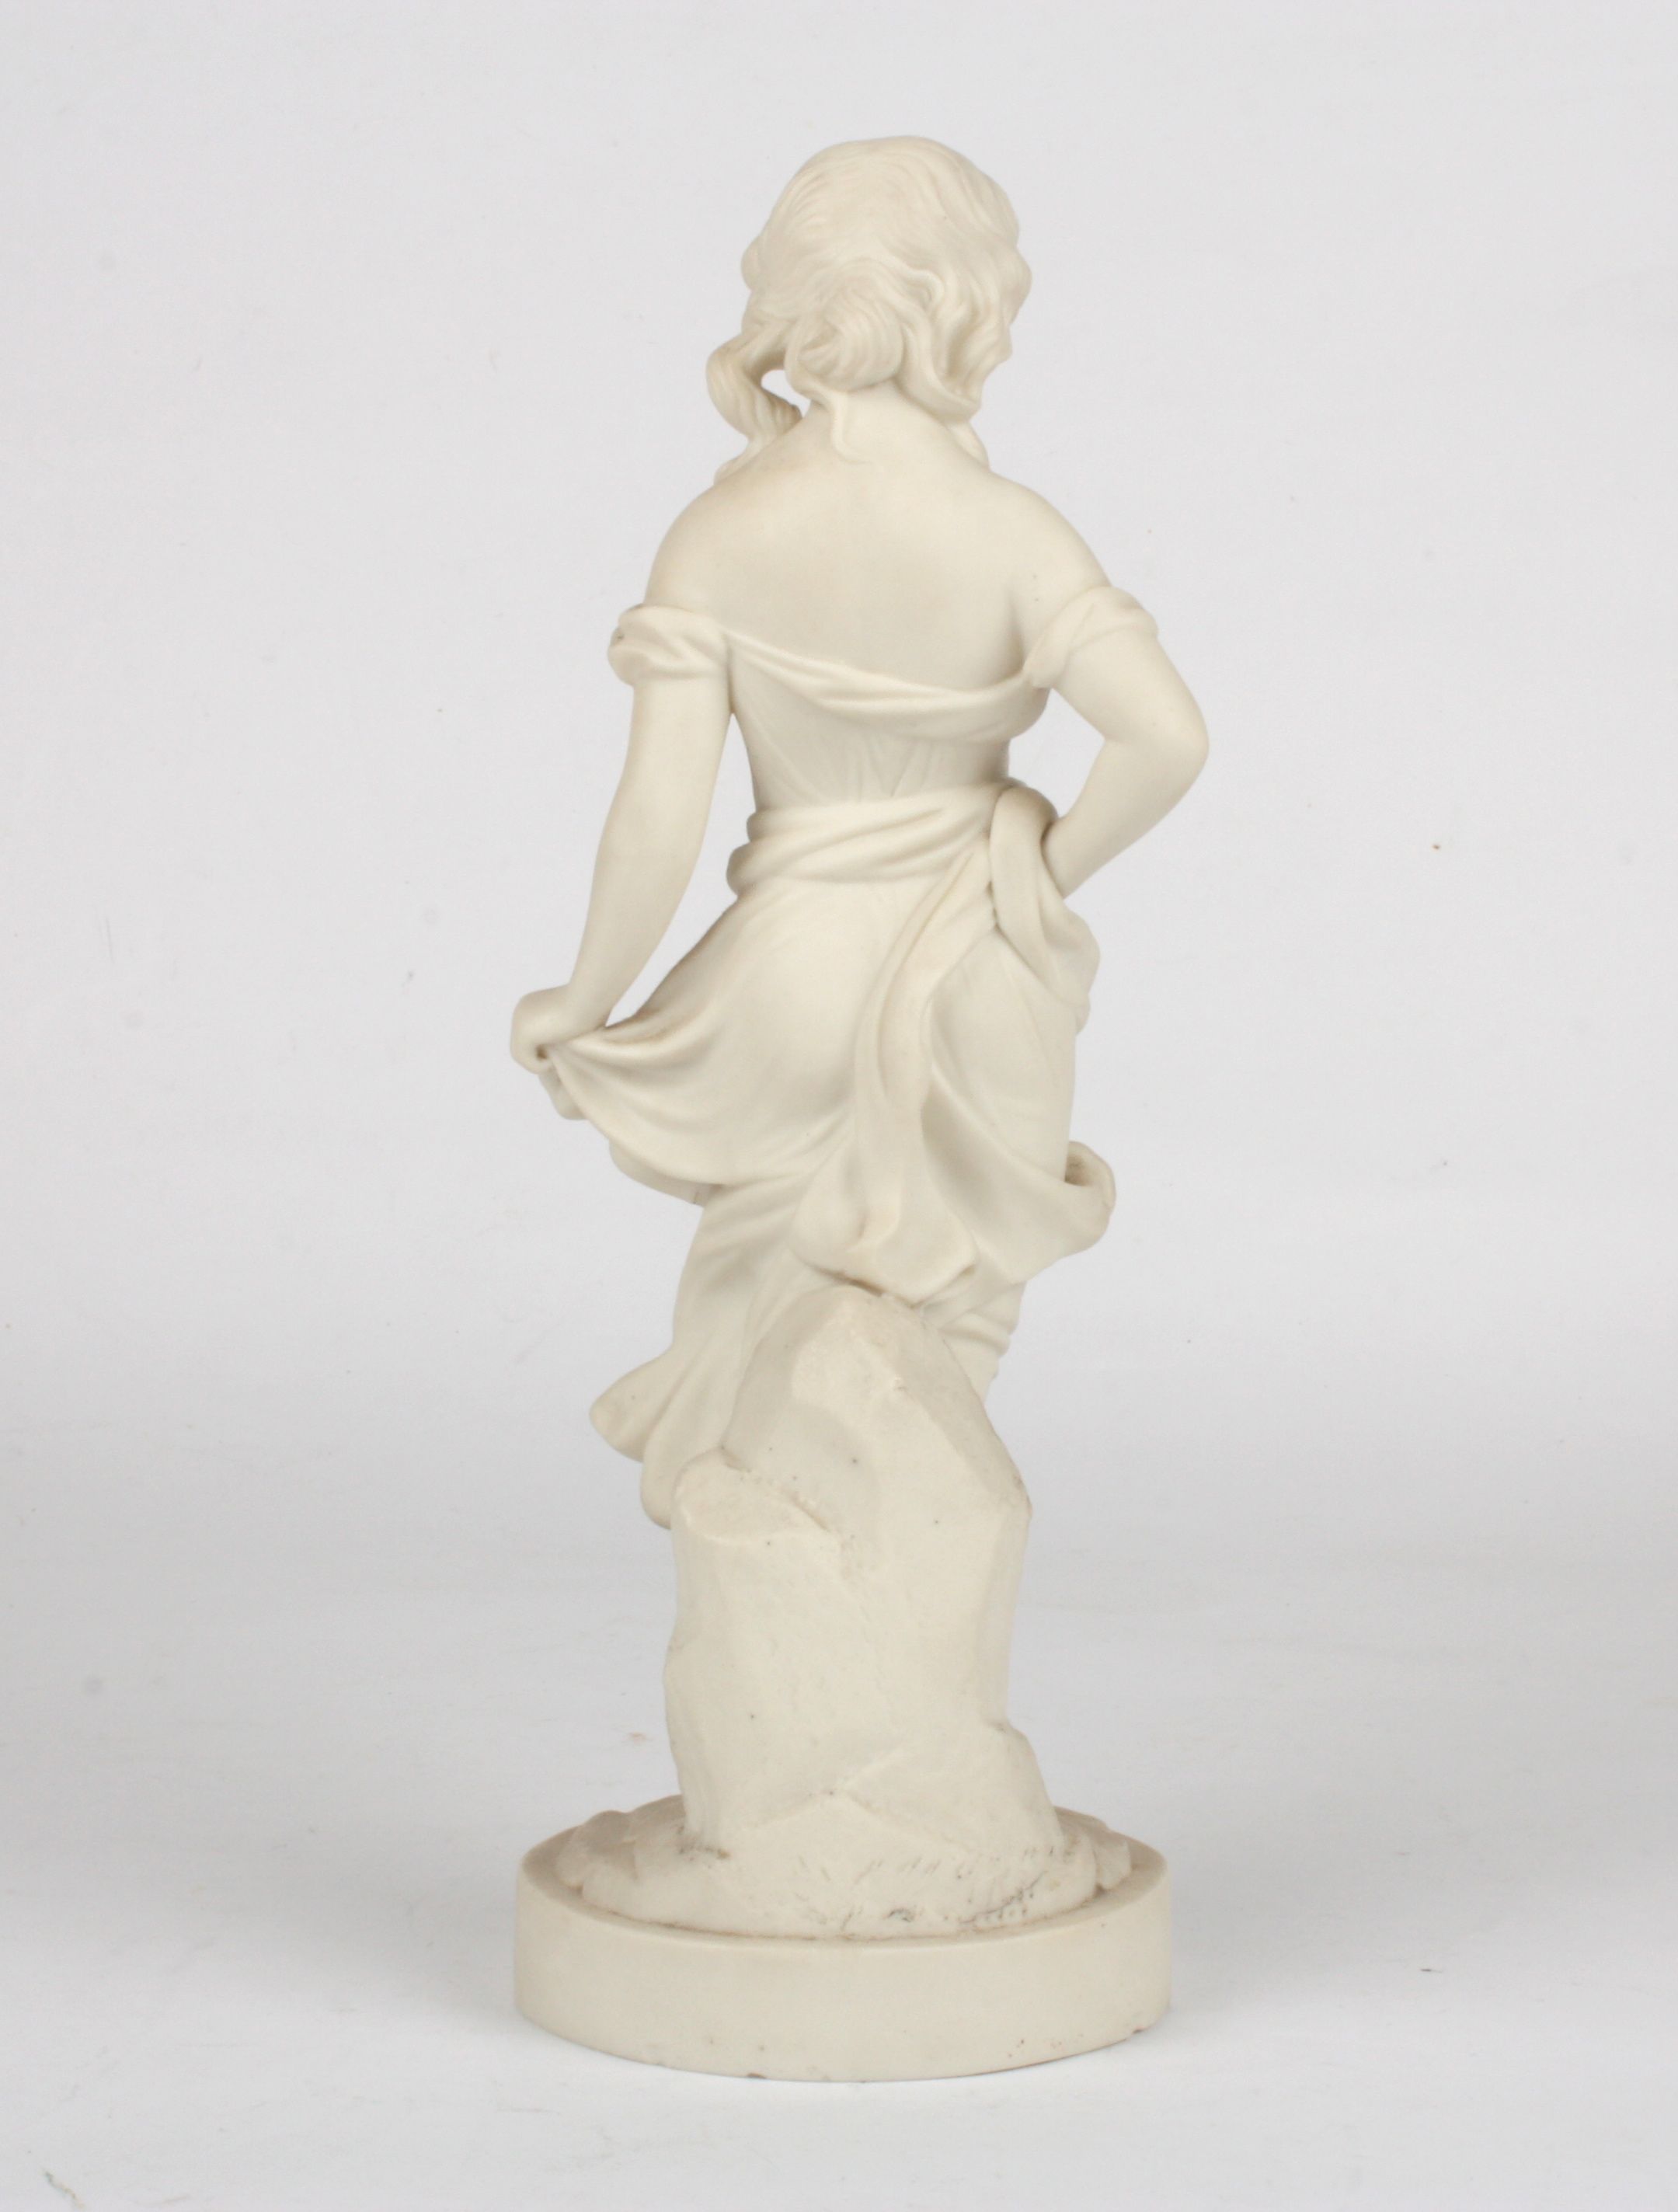 A Victorian style Parian figure of a young girl
stood wearing a flowing robe and supported on a - Image 2 of 2